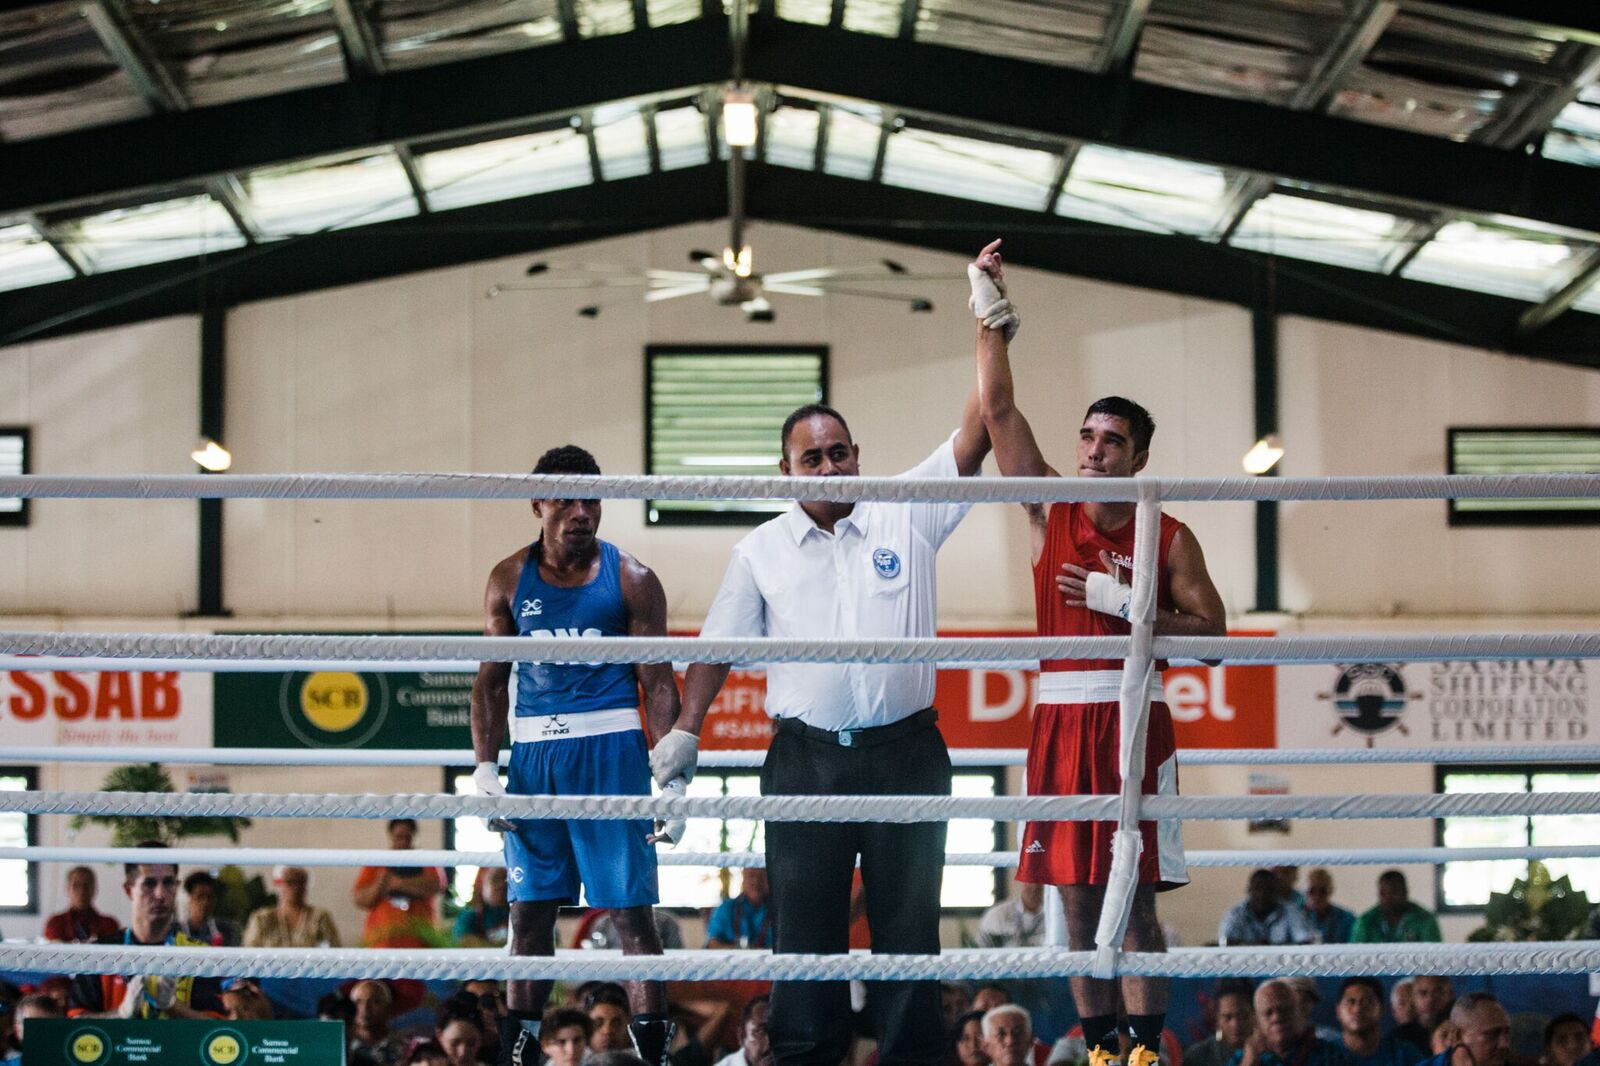 The first preliminary boxing bouts of the Games were held ©Pacific Games News Service/Trina Edwards